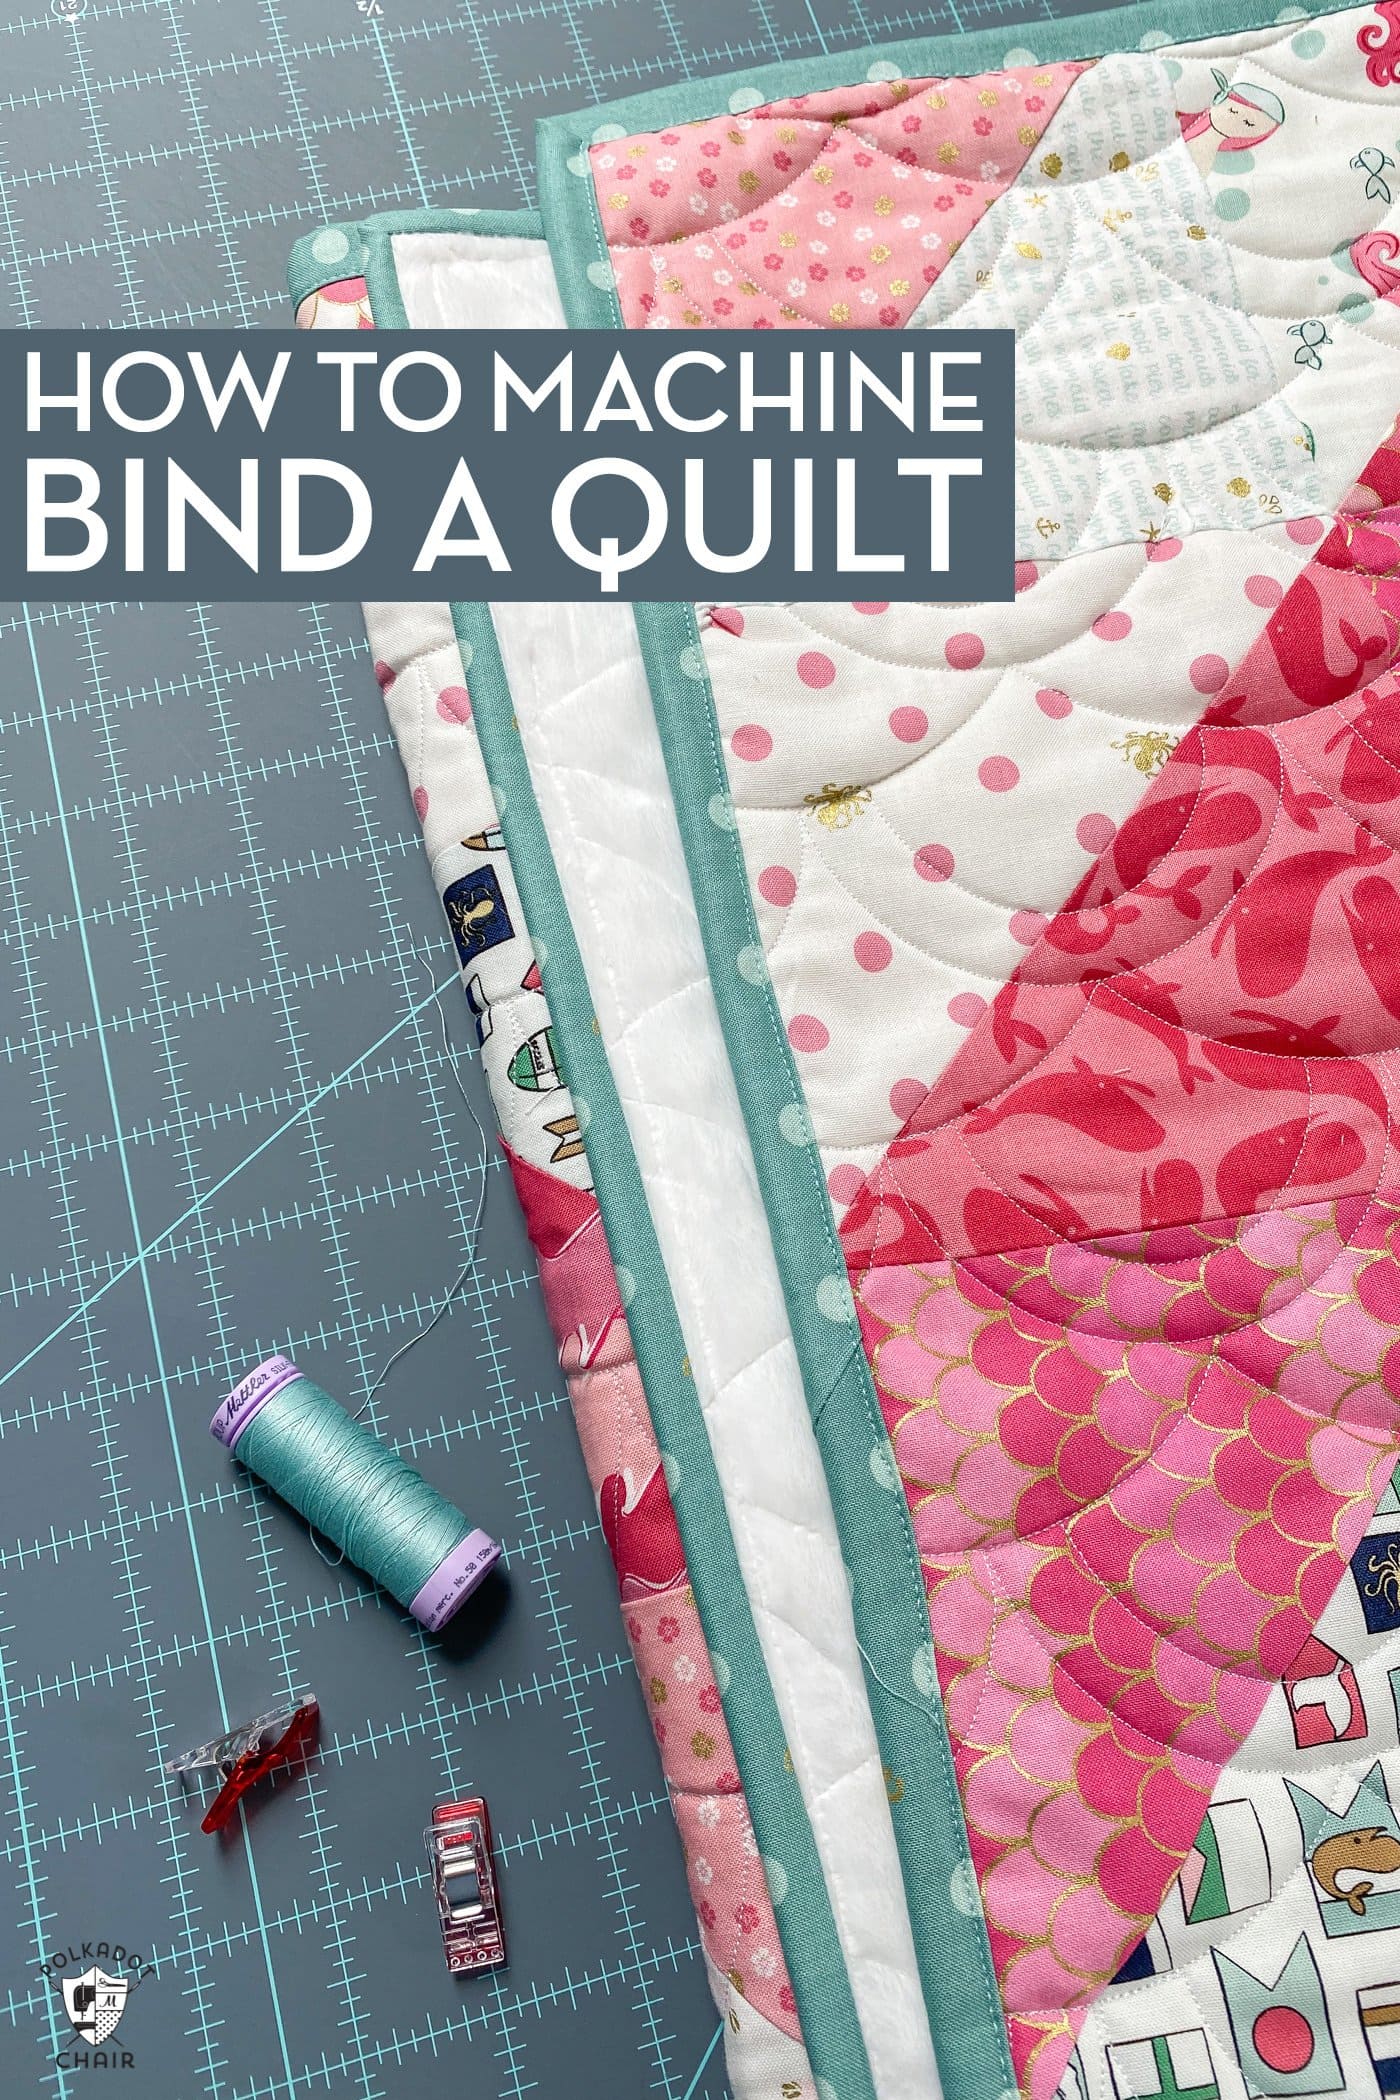 How to Machine Bind a Quilt; A Step-by-Step Guide